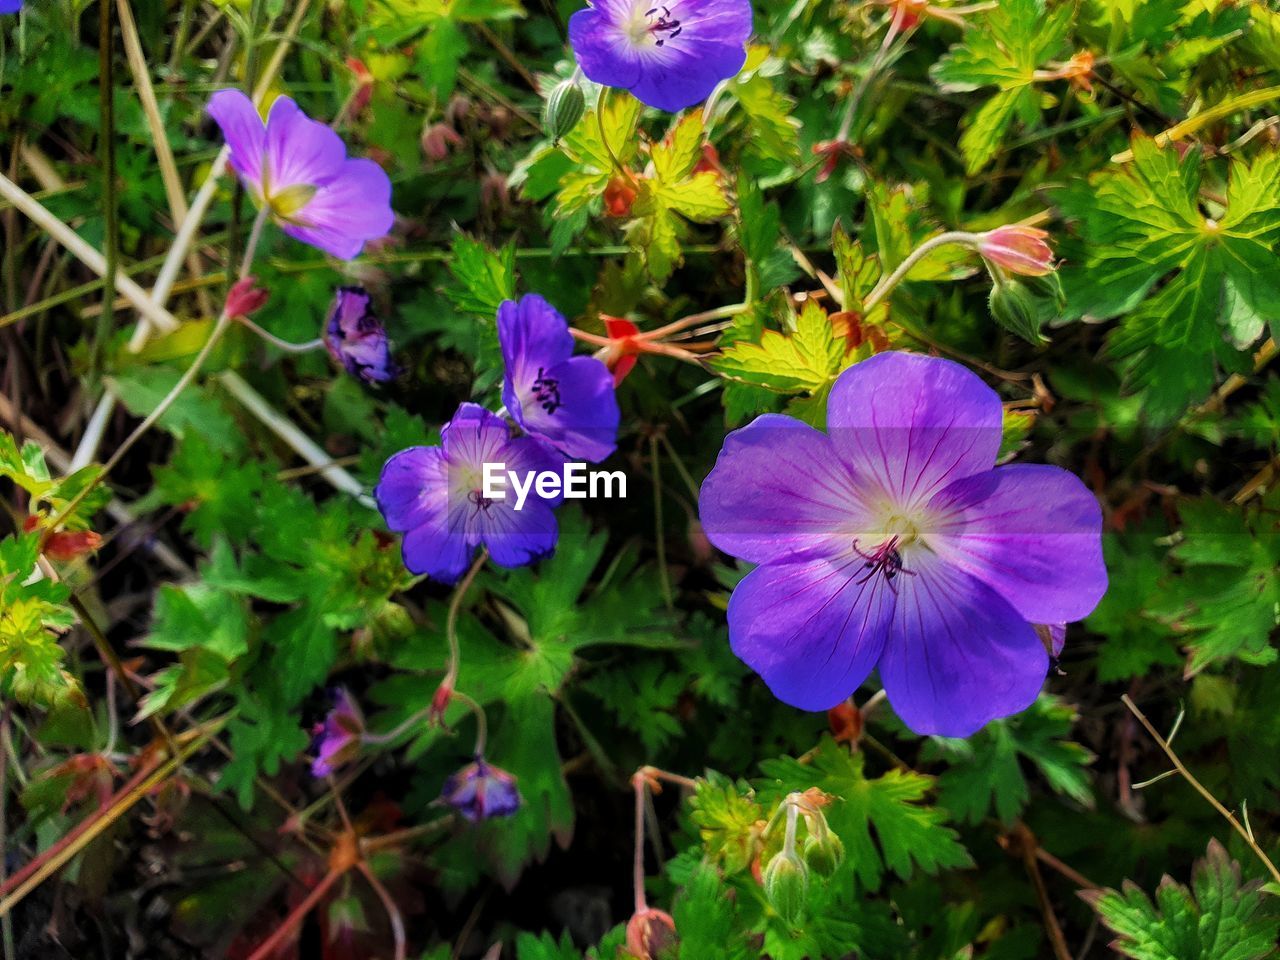 flowering plant, flower, plant, beauty in nature, purple, freshness, growth, nature, fragility, close-up, inflorescence, petal, plant part, flower head, leaf, wildflower, botany, no people, green, high angle view, blue, pansy, day, outdoors, land, sunlight